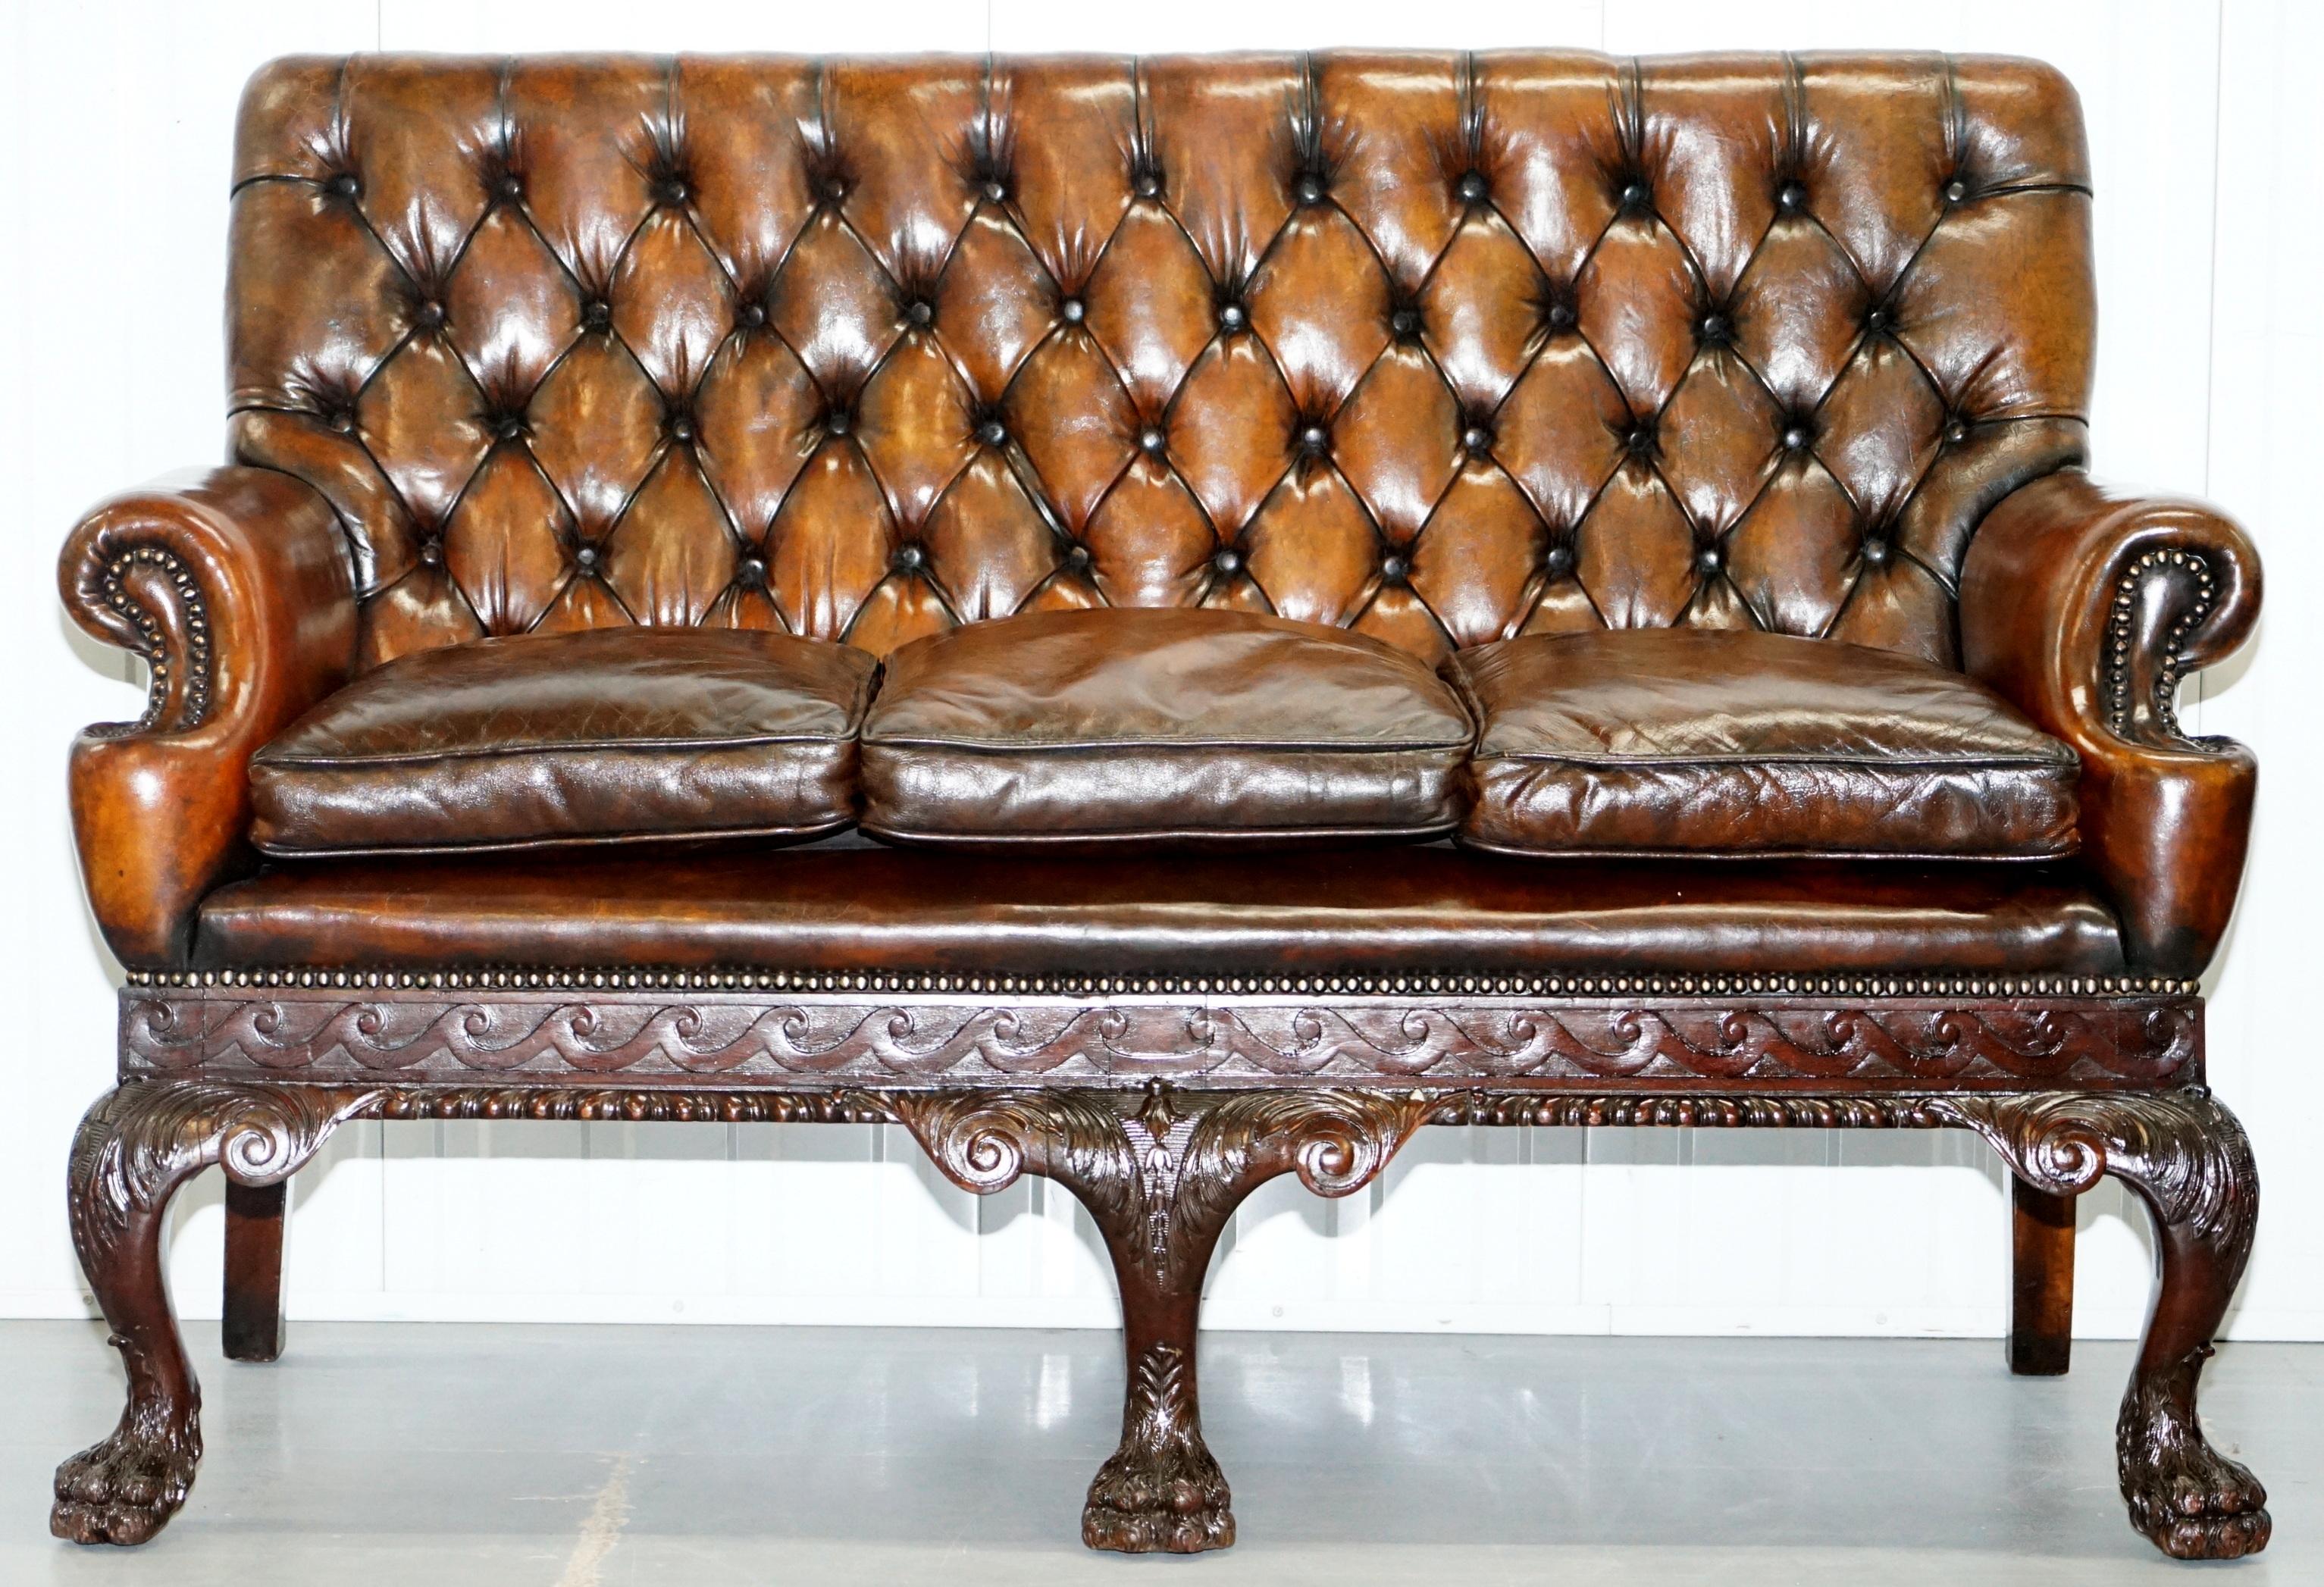 We are delighted to offer for sale this absolutely stunning Georgian Irish style late Victorian Chesterfield brown leather sofa with hand-carved Lion hairy paw feet

I’ve never seen another of this quality style and charm, it is simply exquisite